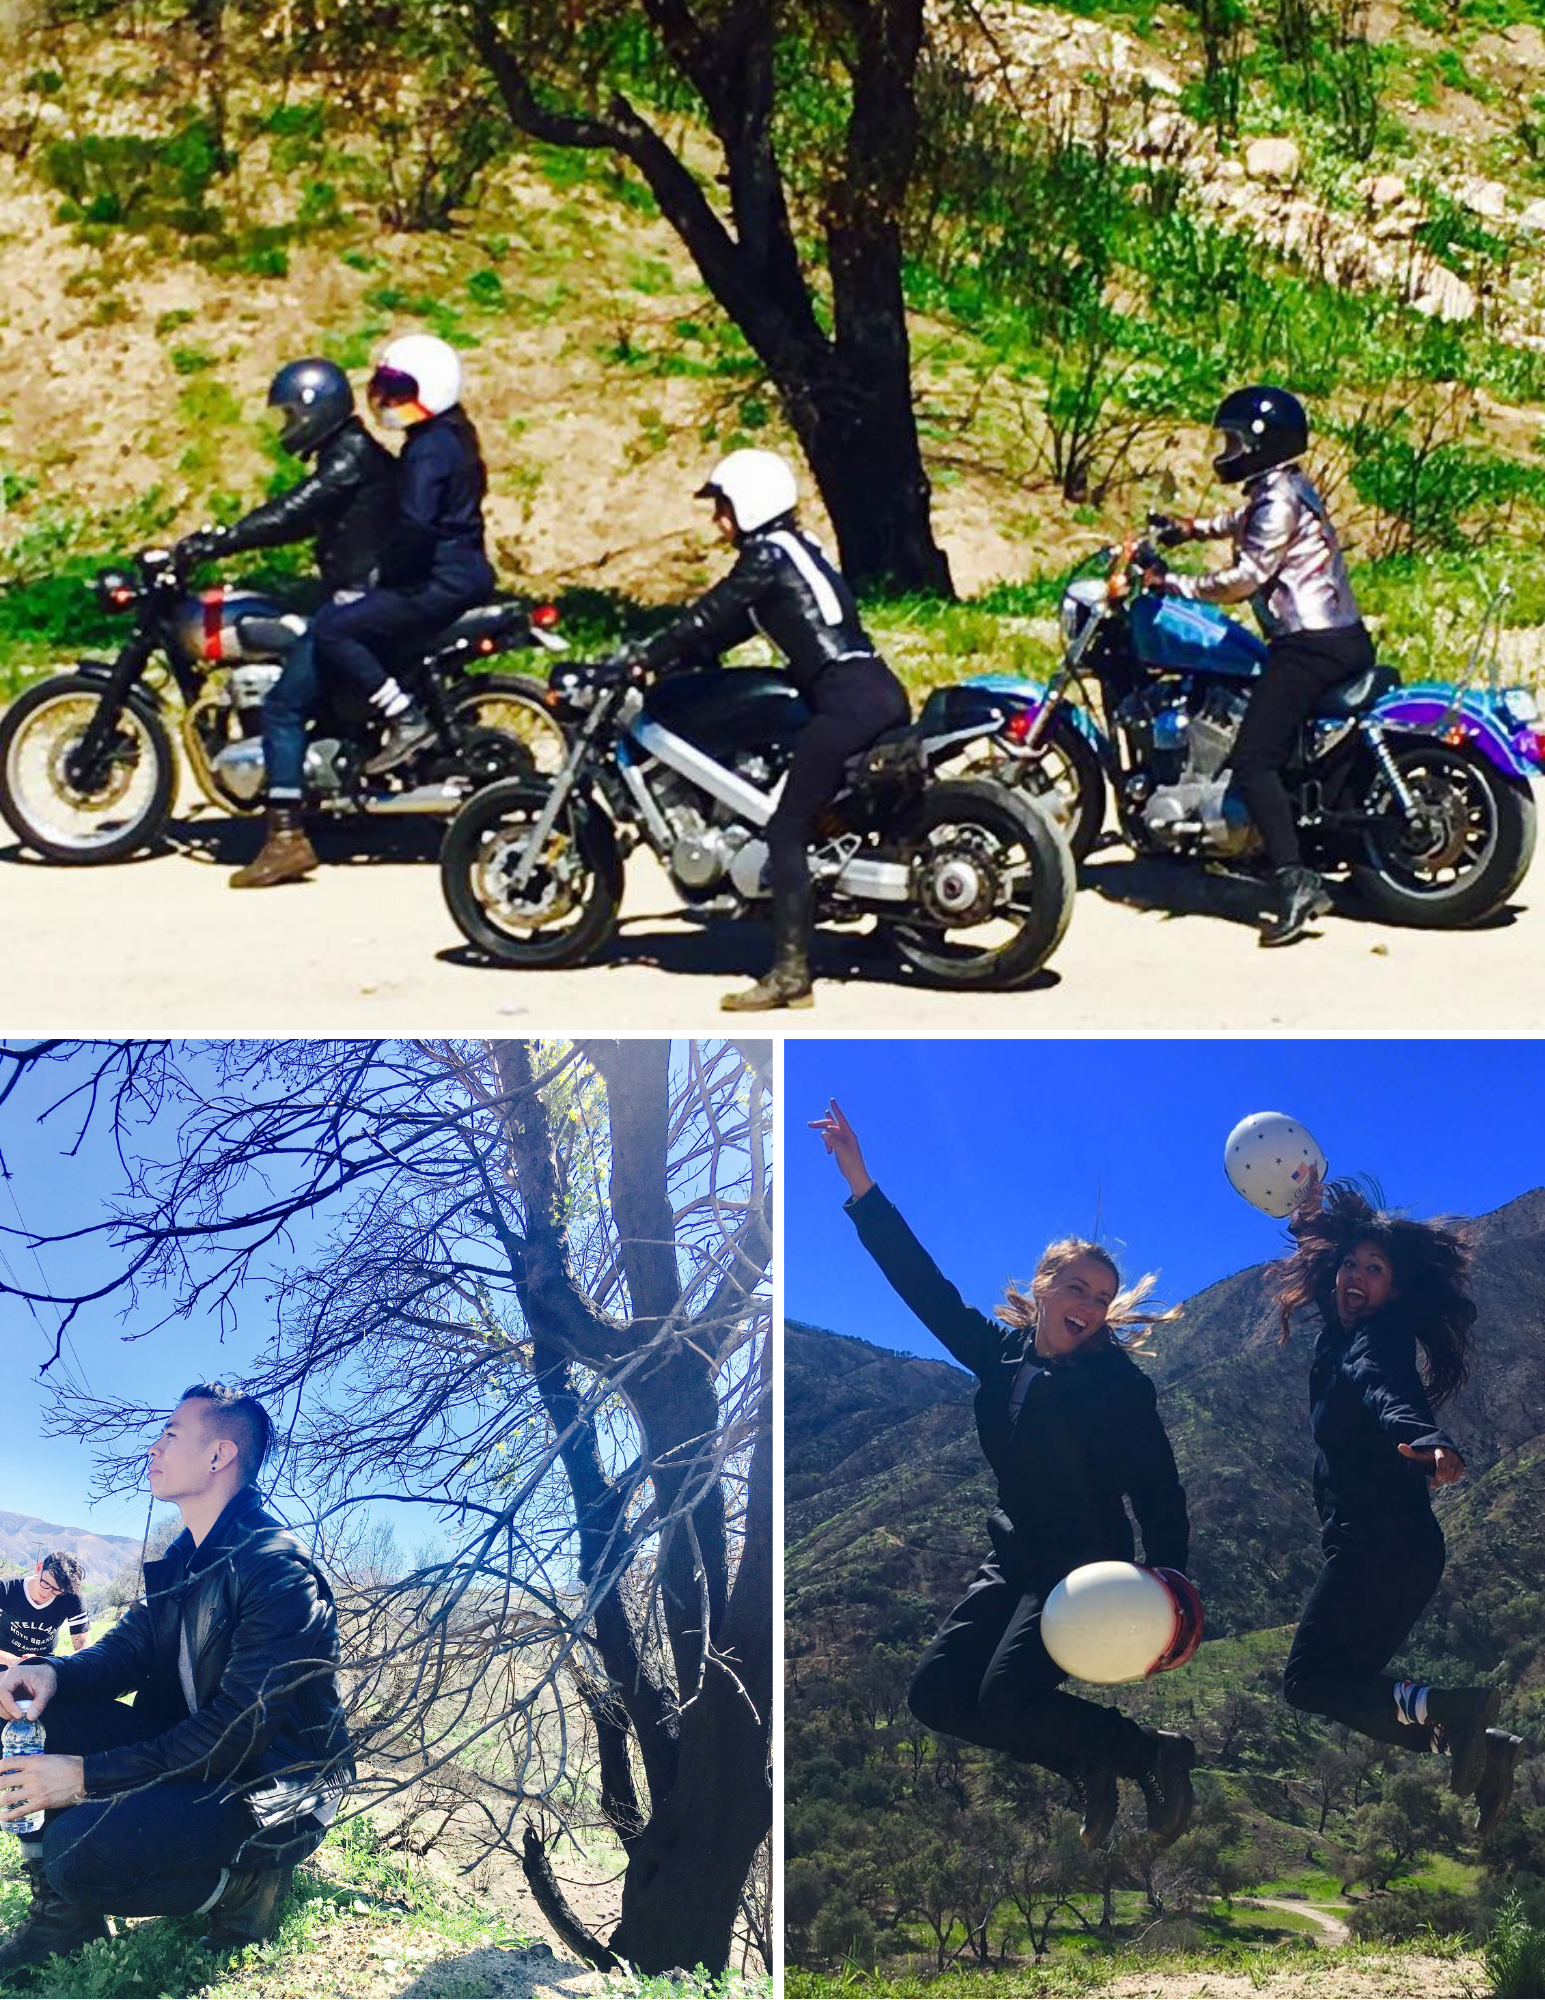 Motorcyclists jumping for joy and hanging out on the side of the road